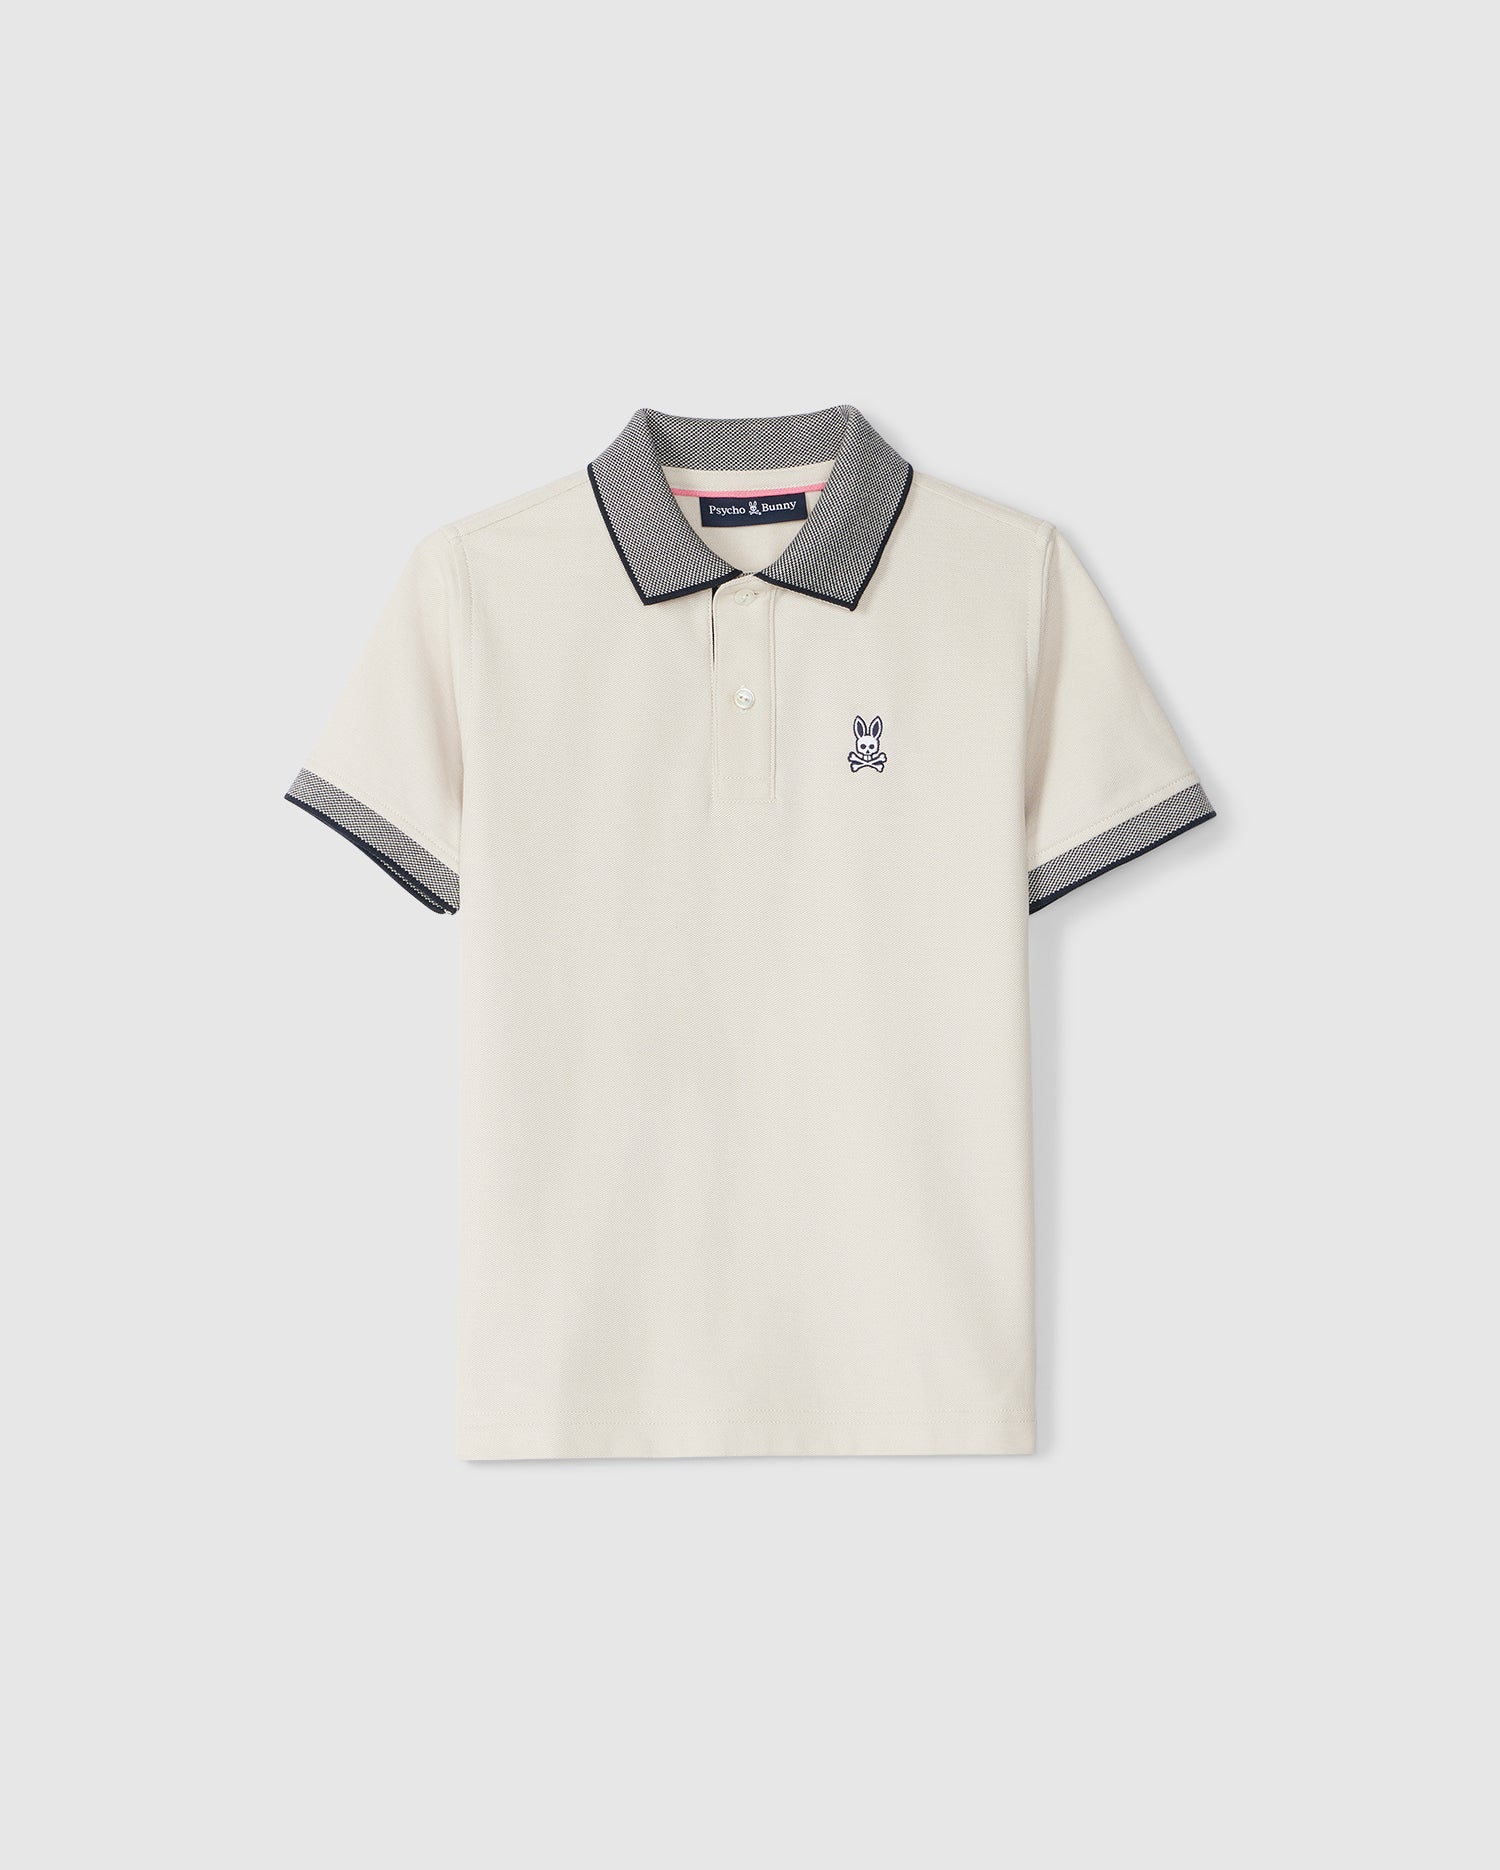 A light beige KIDS SOUTHPORT PIQUE POLO SHIRT - B0K263B200 by Psycho Bunny in Pima cotton piqué with dark grey trim on the collar and sleeves. The shirt features a small embroidered logo of a rabbit on the left chest. This stylish polo has a three-button placket and is displayed against a plain white background.